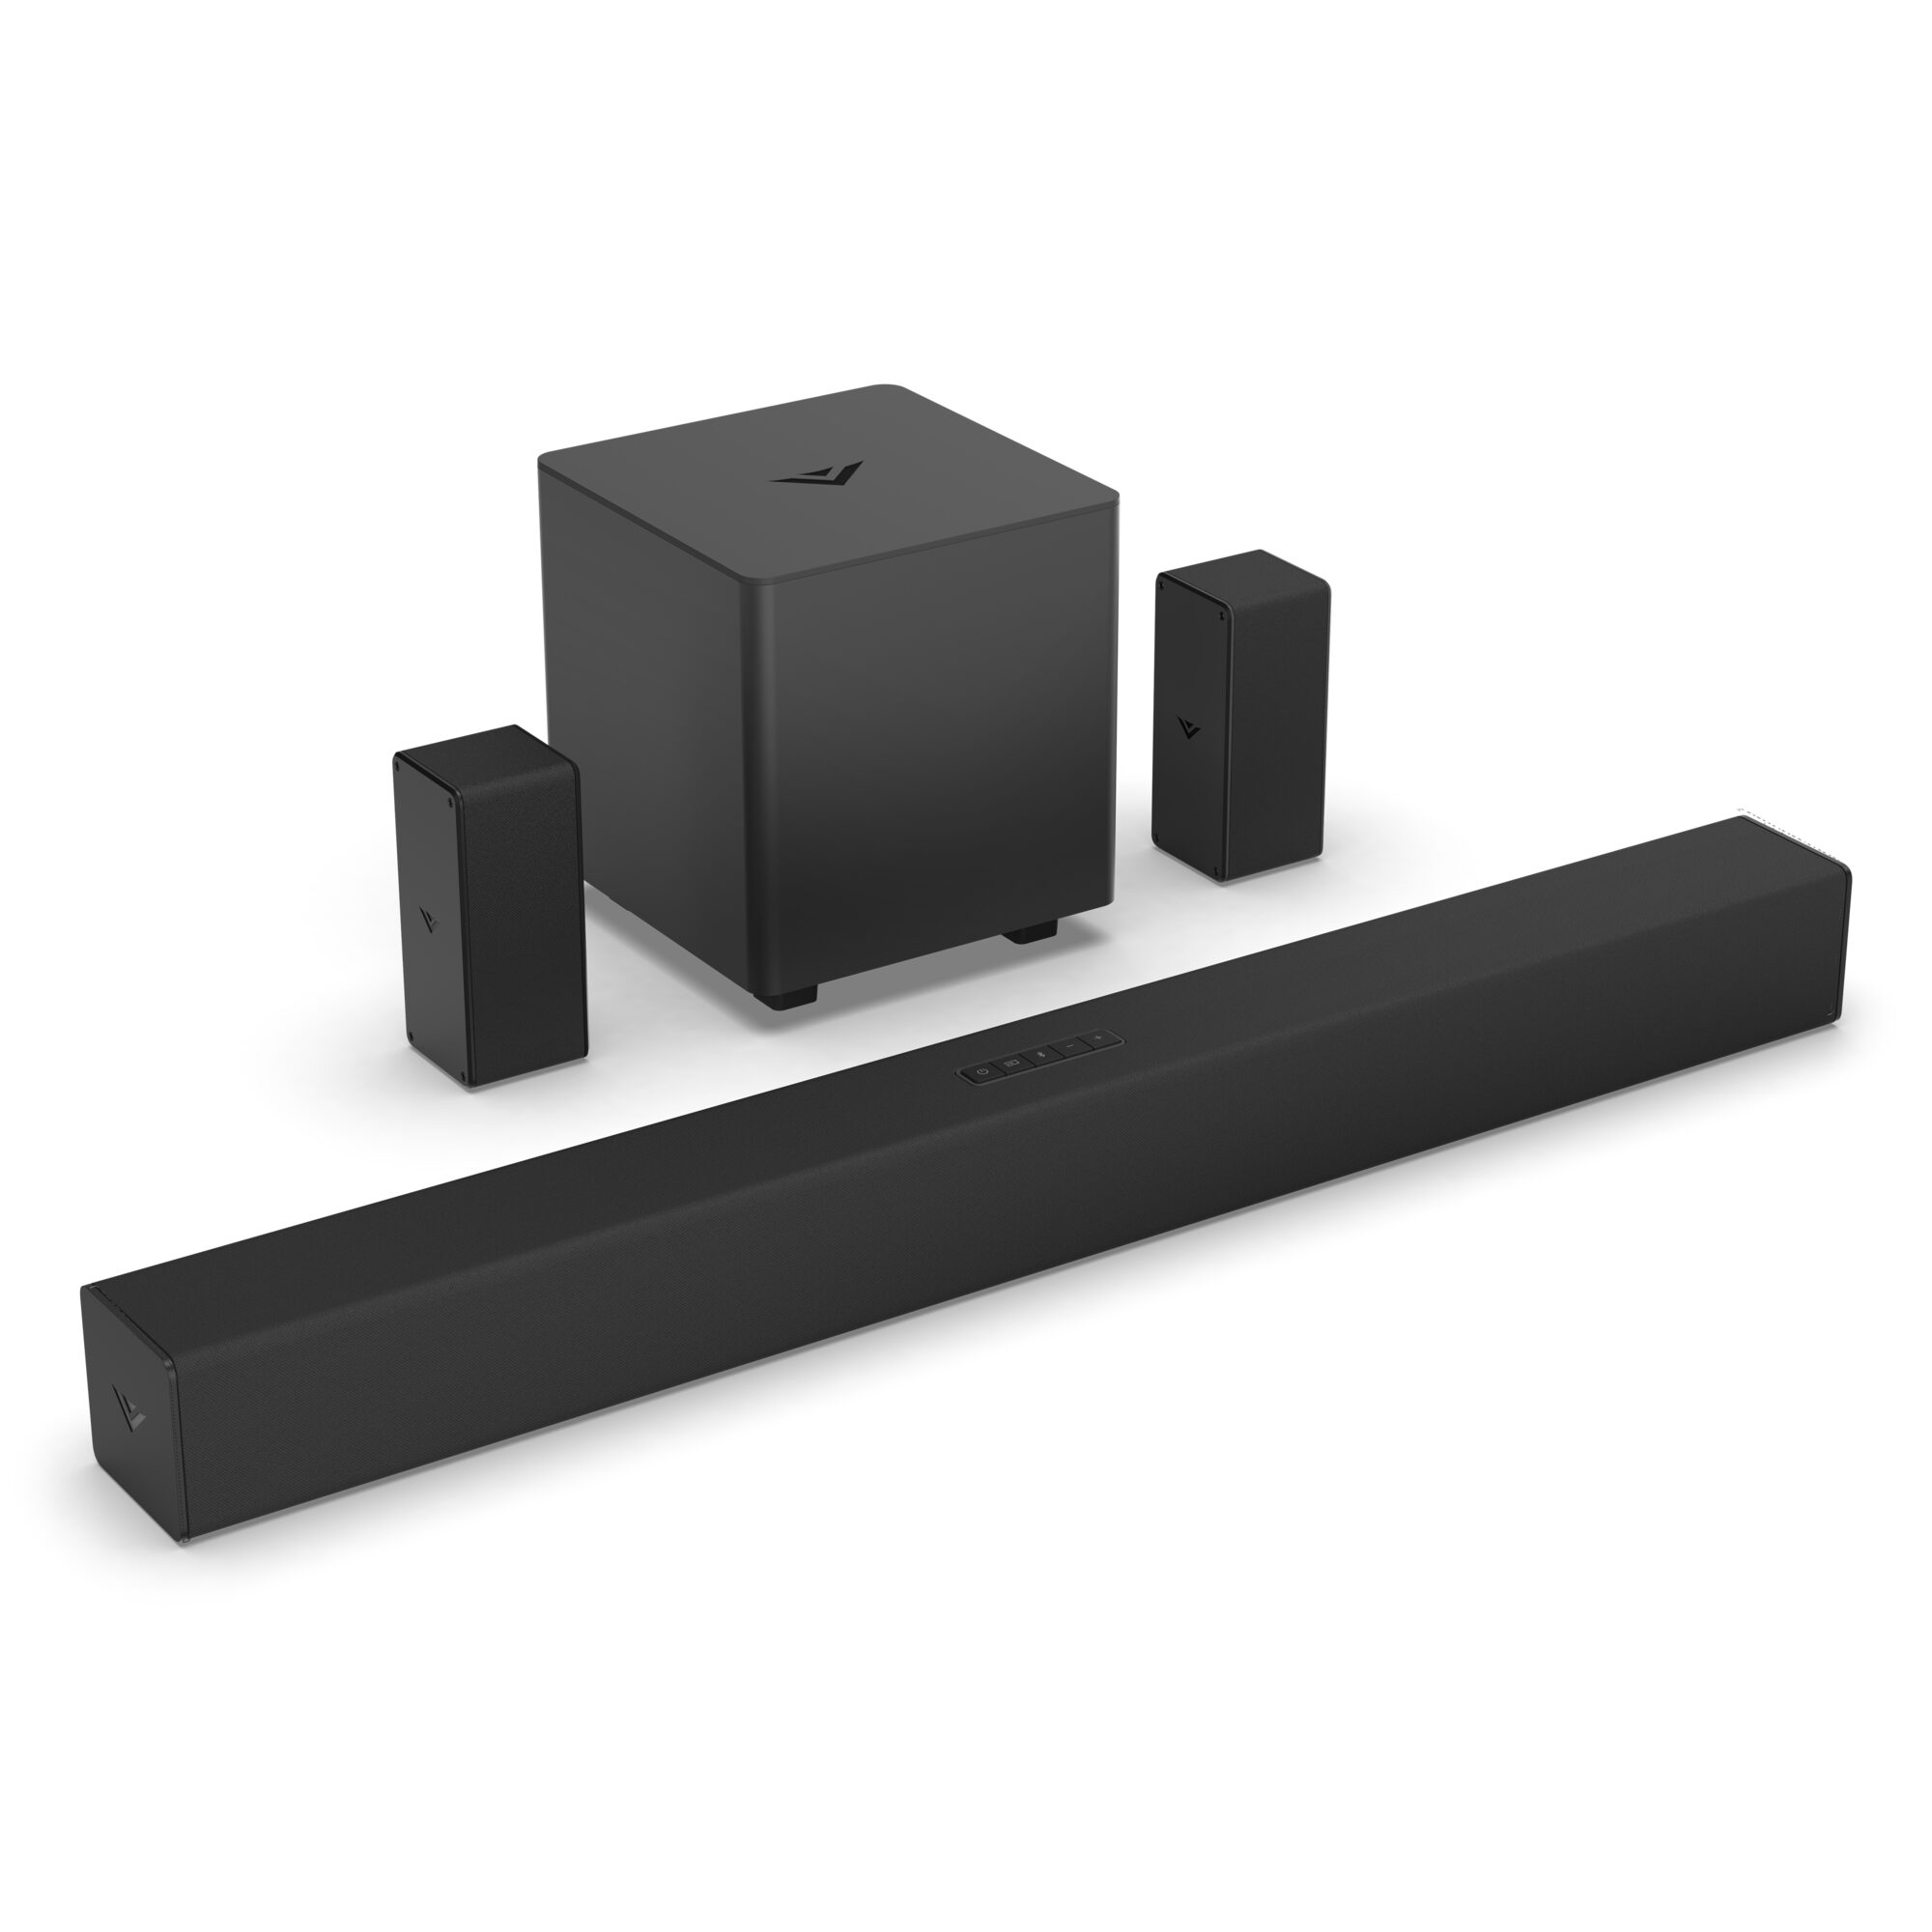 VIZIO 32" 4.1 Sound Bar with Wireless Subwoofer (SB3241n-H6) - image 1 of 15